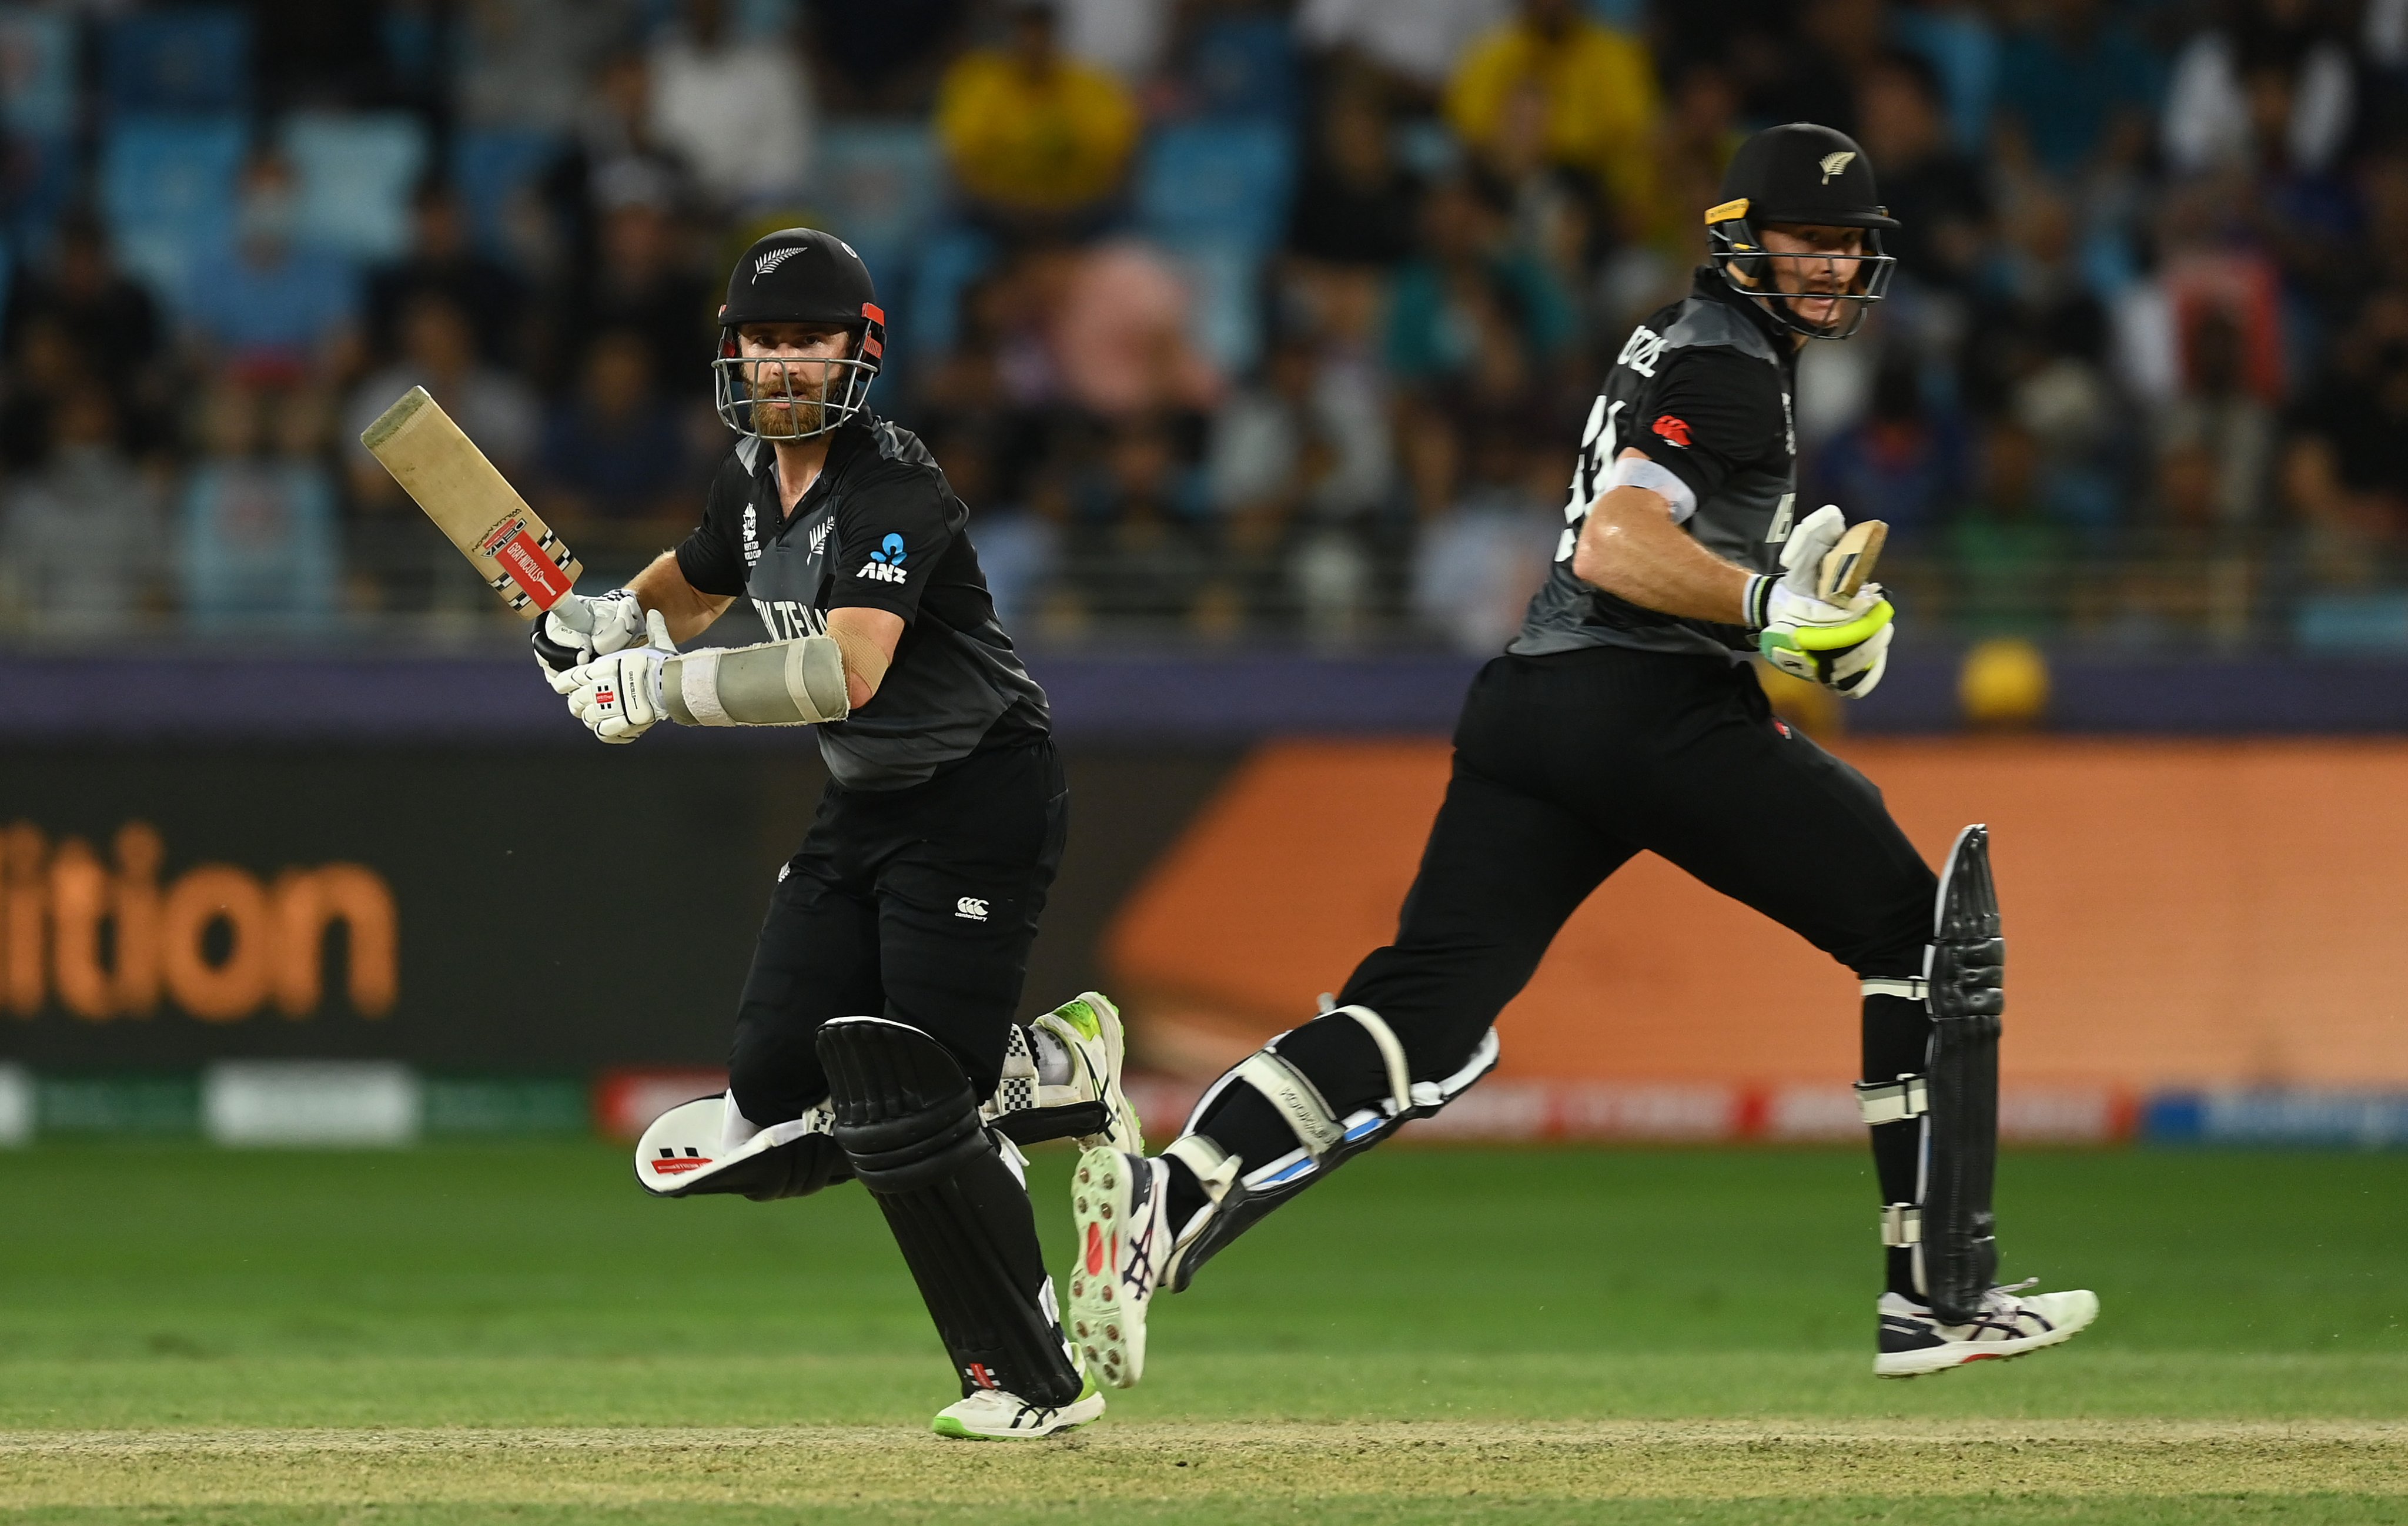 T20 World Cup 2021 Final | New Zealand were a little timid, didn’t fire bullets against Australia, says Brendon McCullum